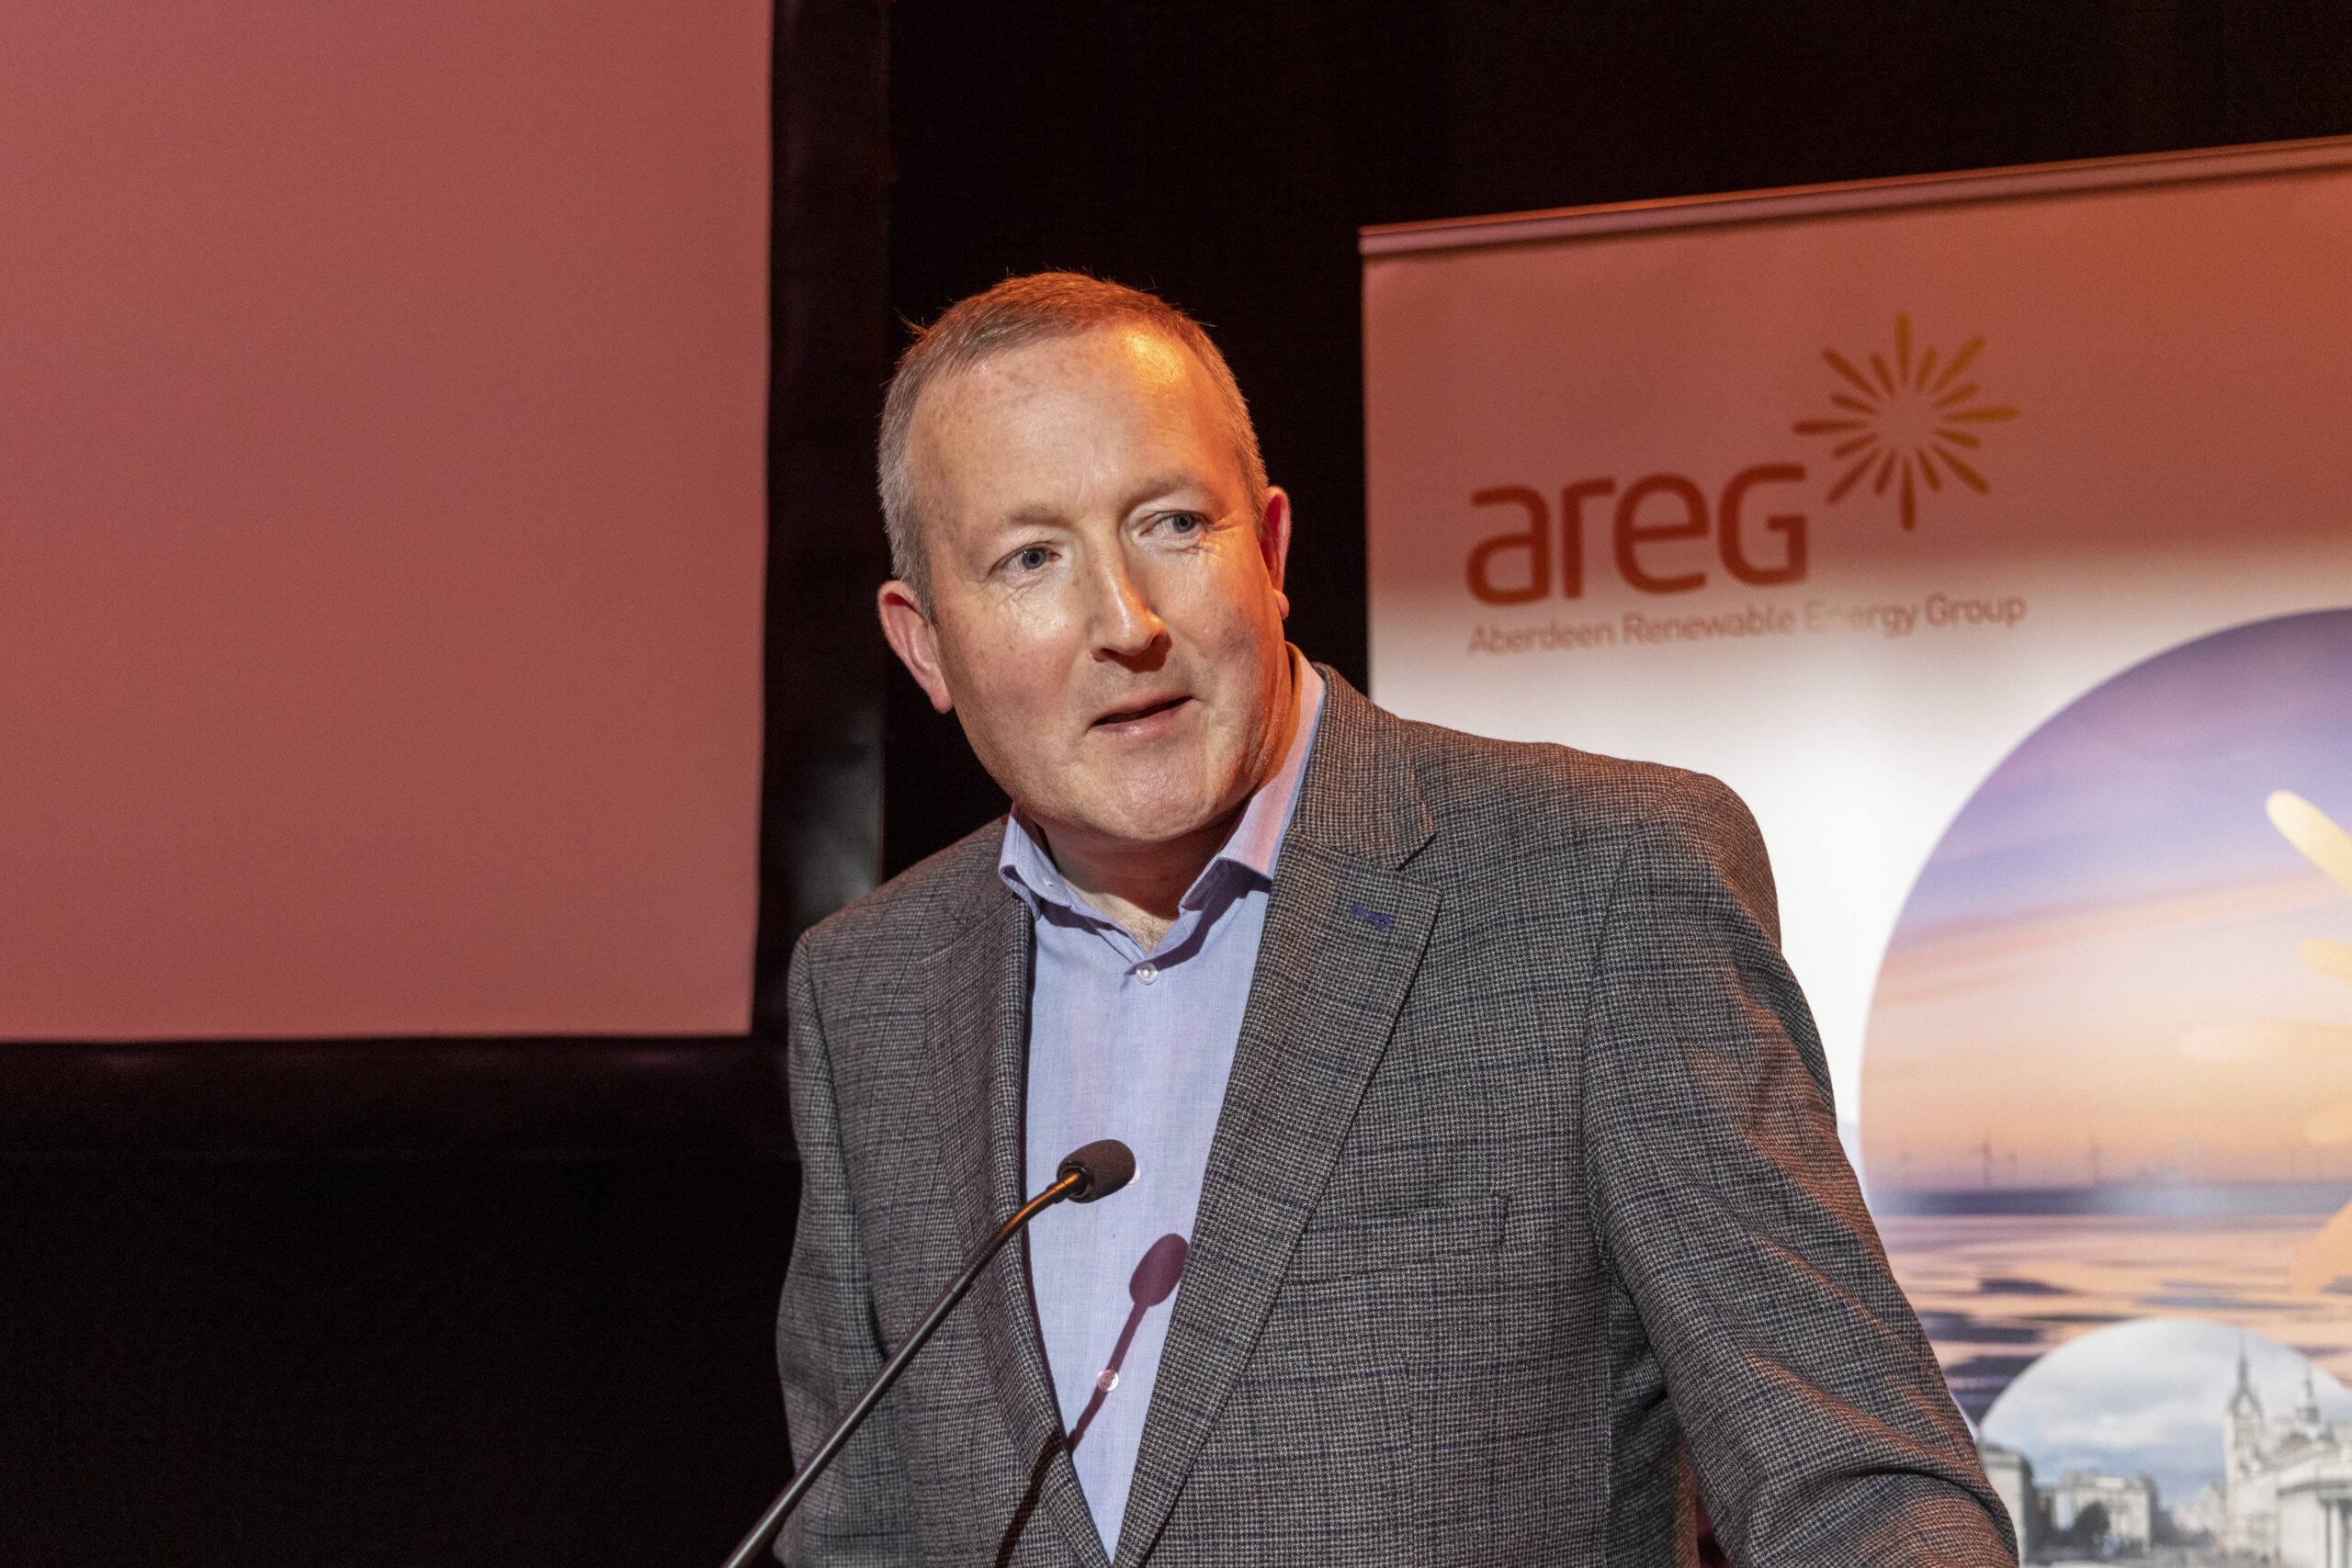 AREG NEWS: David Rodger, CEO to step down at the end of March